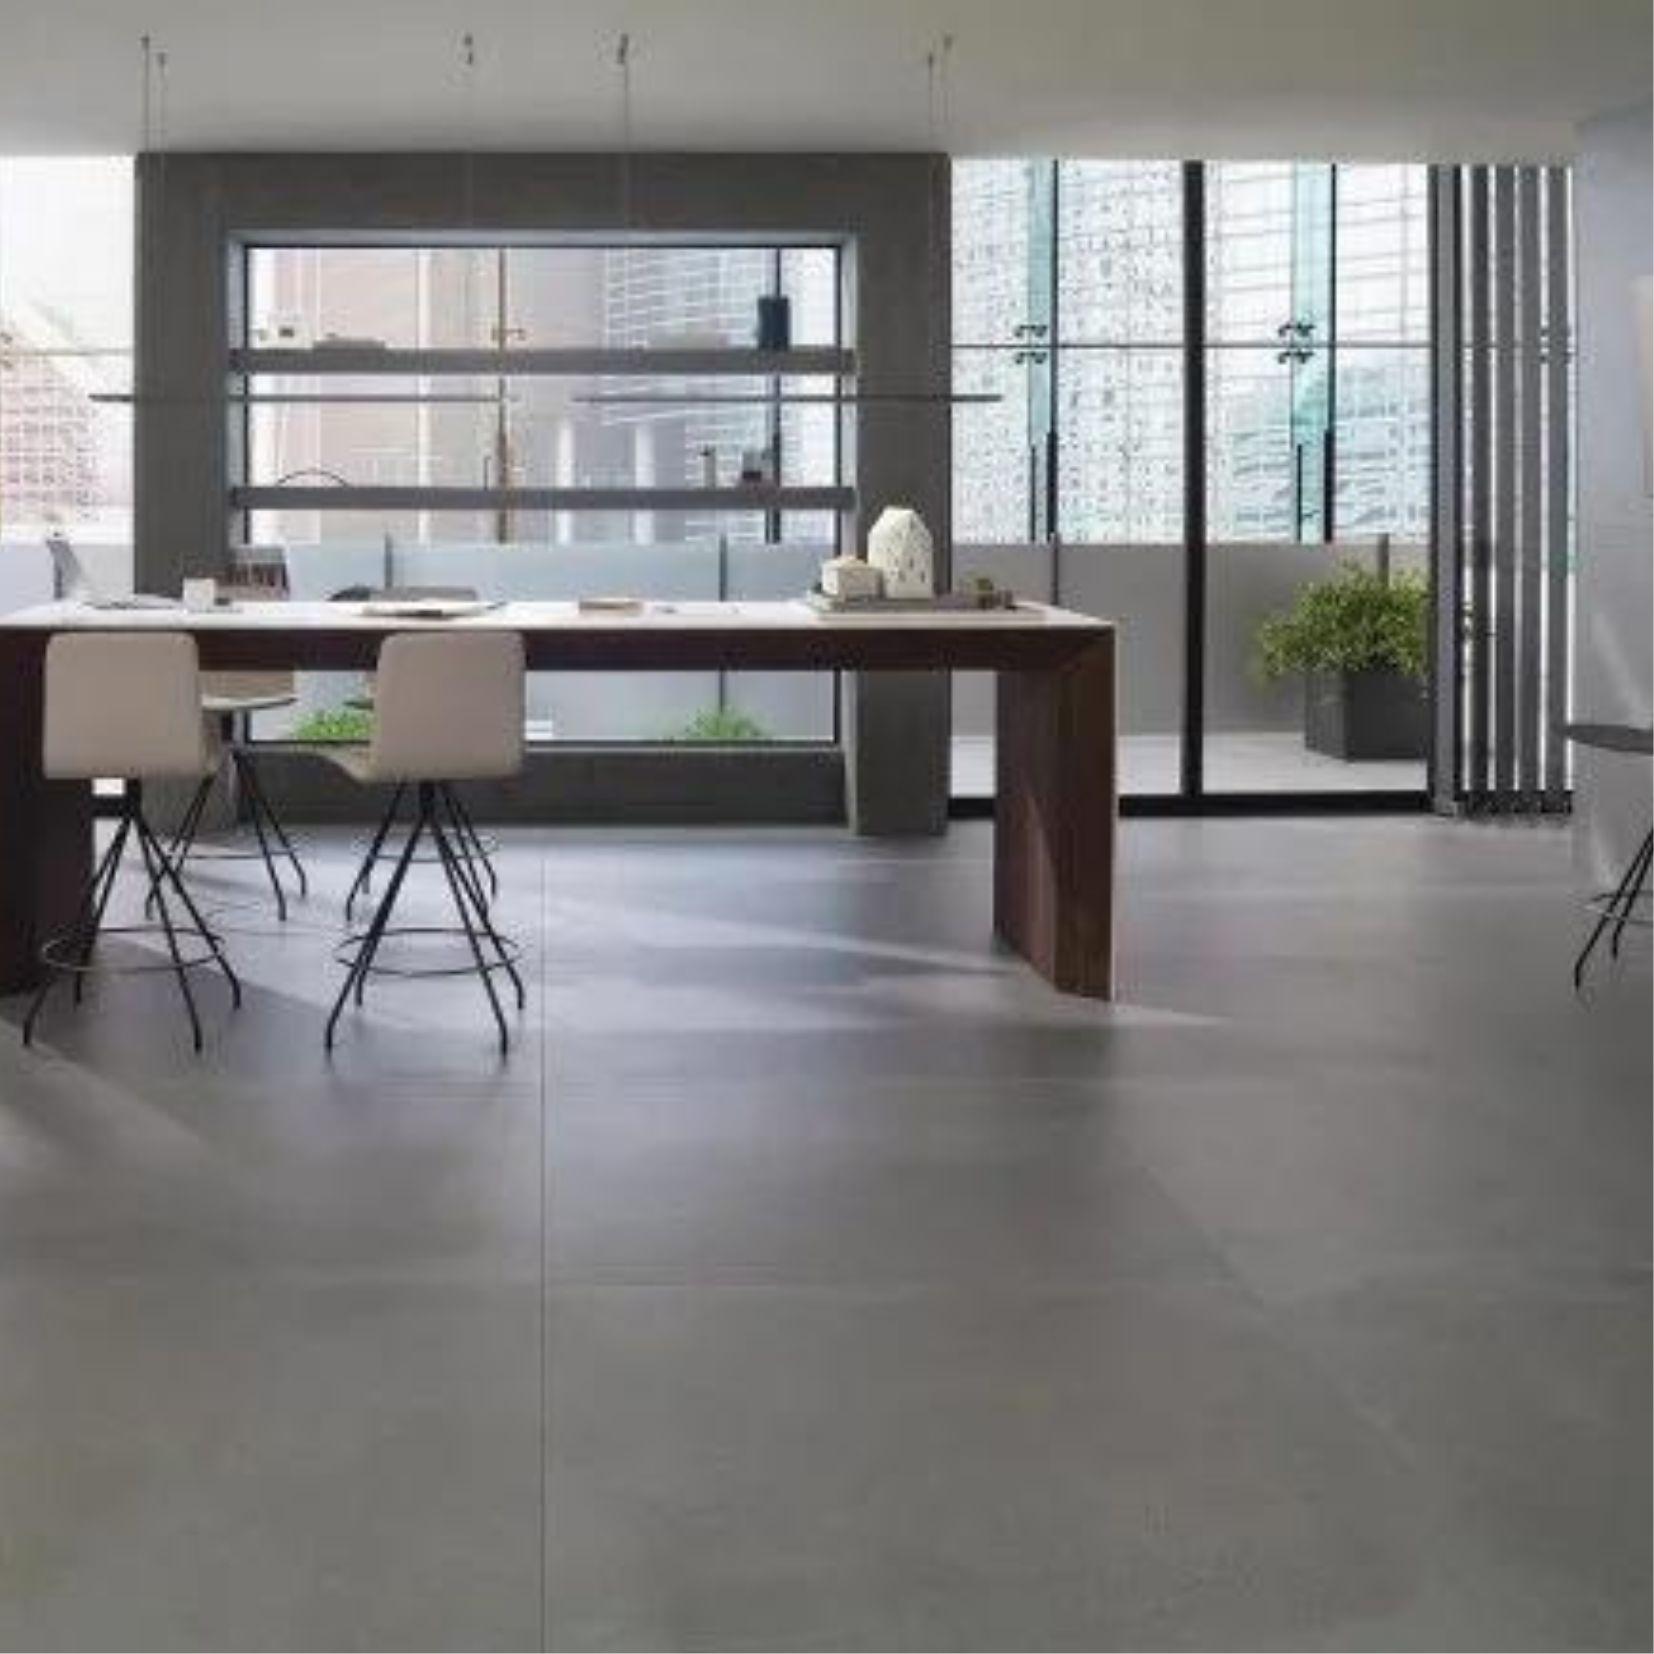 View the full Devonshire collection here View the full collection of Patterned Tiles here 1